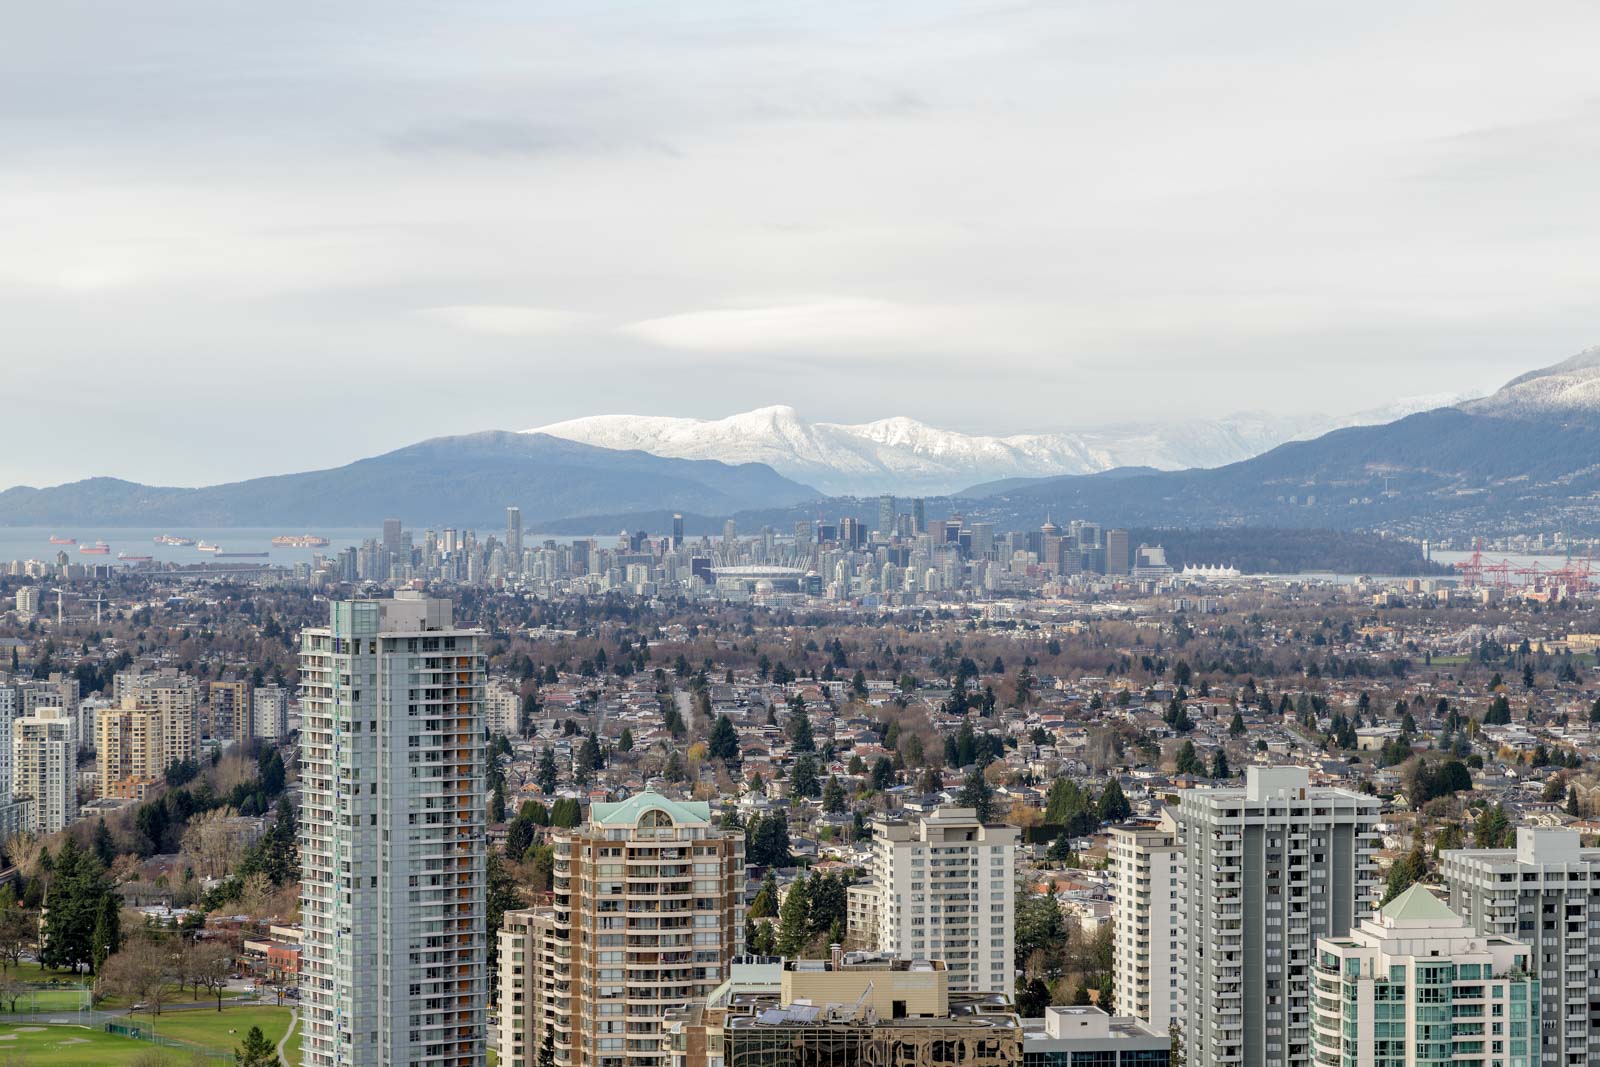 view from balcony in an upscale in Burnaby's Metrotown neighbourhood